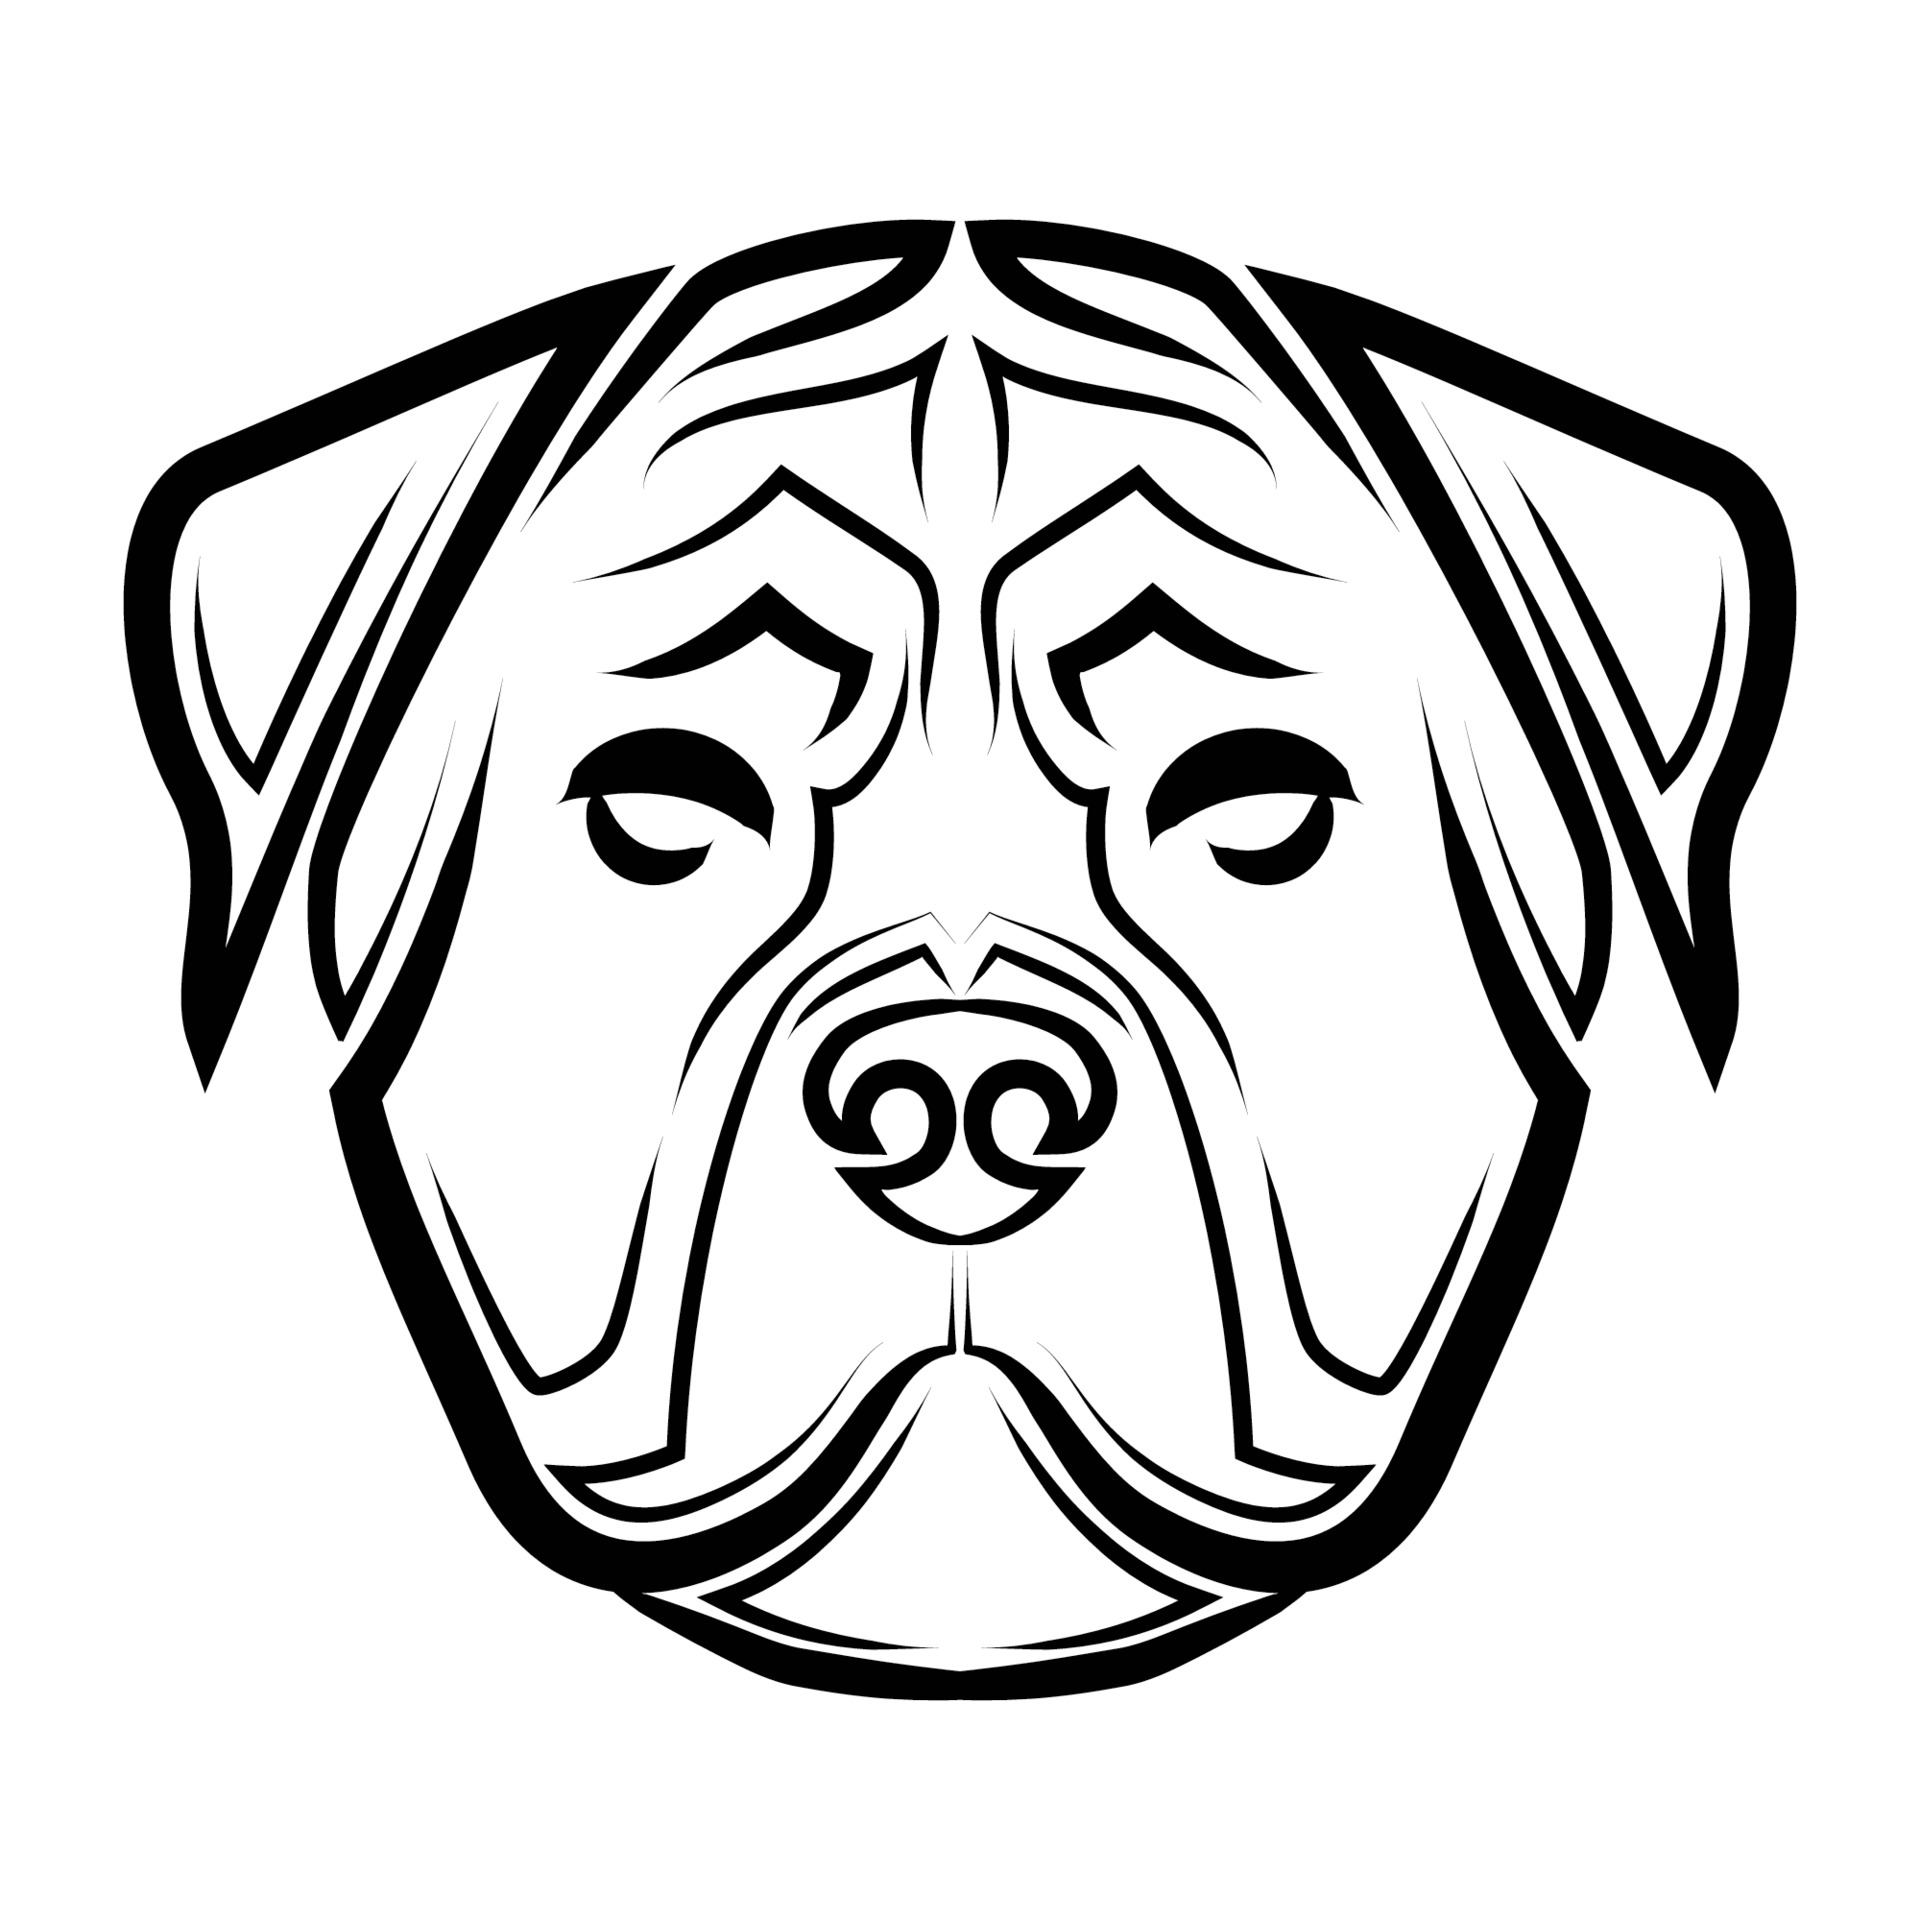 Rottweiler SVG Peeking Dog, Vector, DXF, PNG, Clipart Vector Graphic